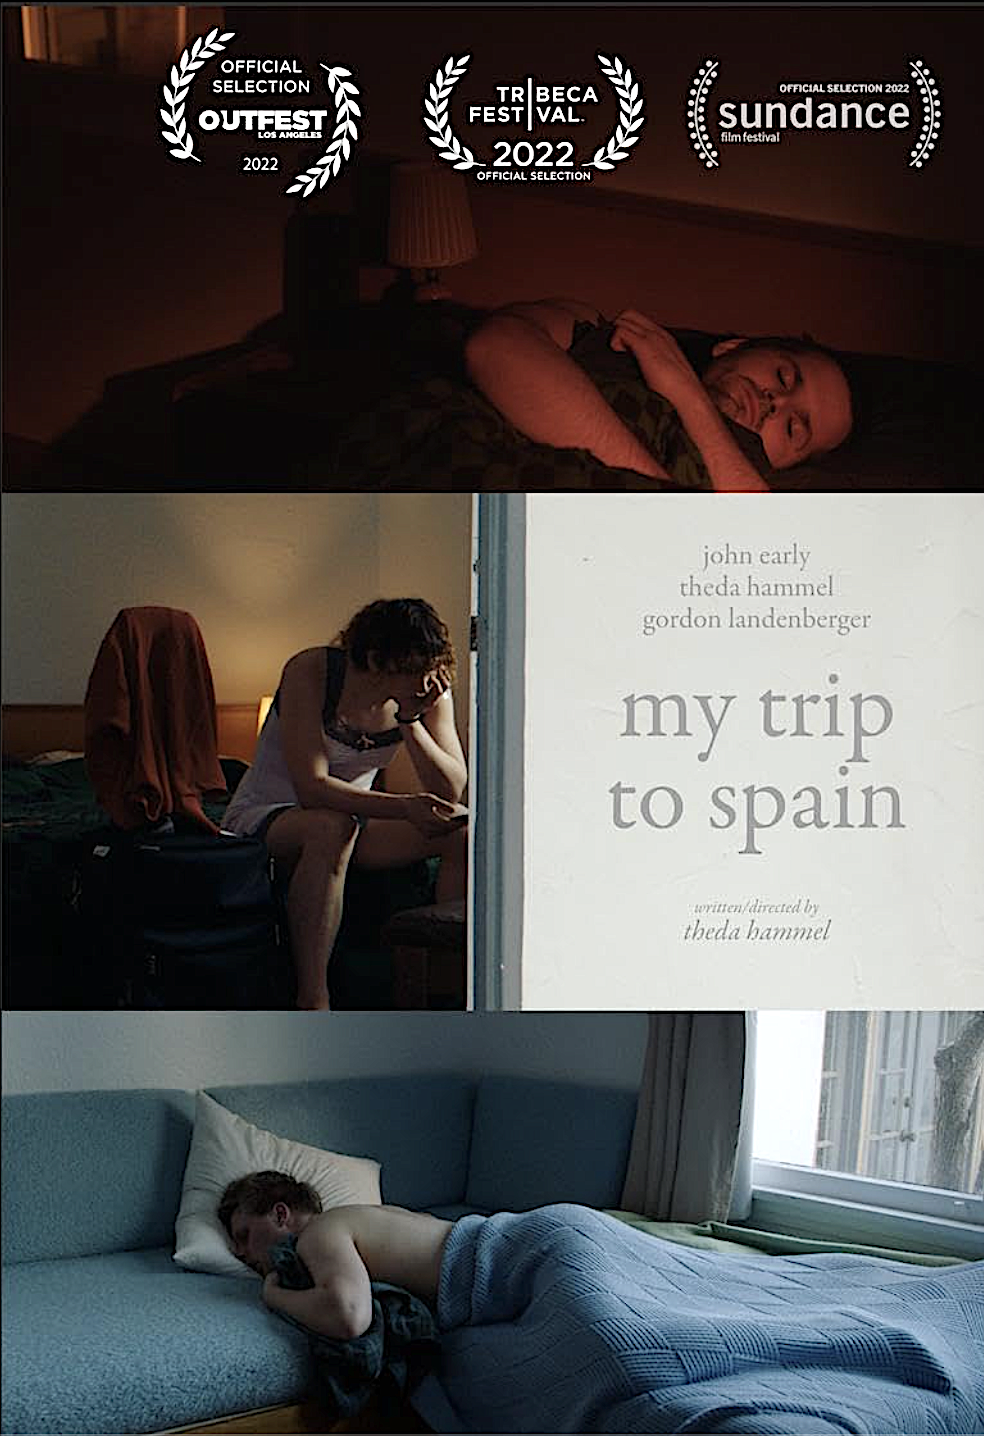 Producer, MY TRIP TO SPAIN